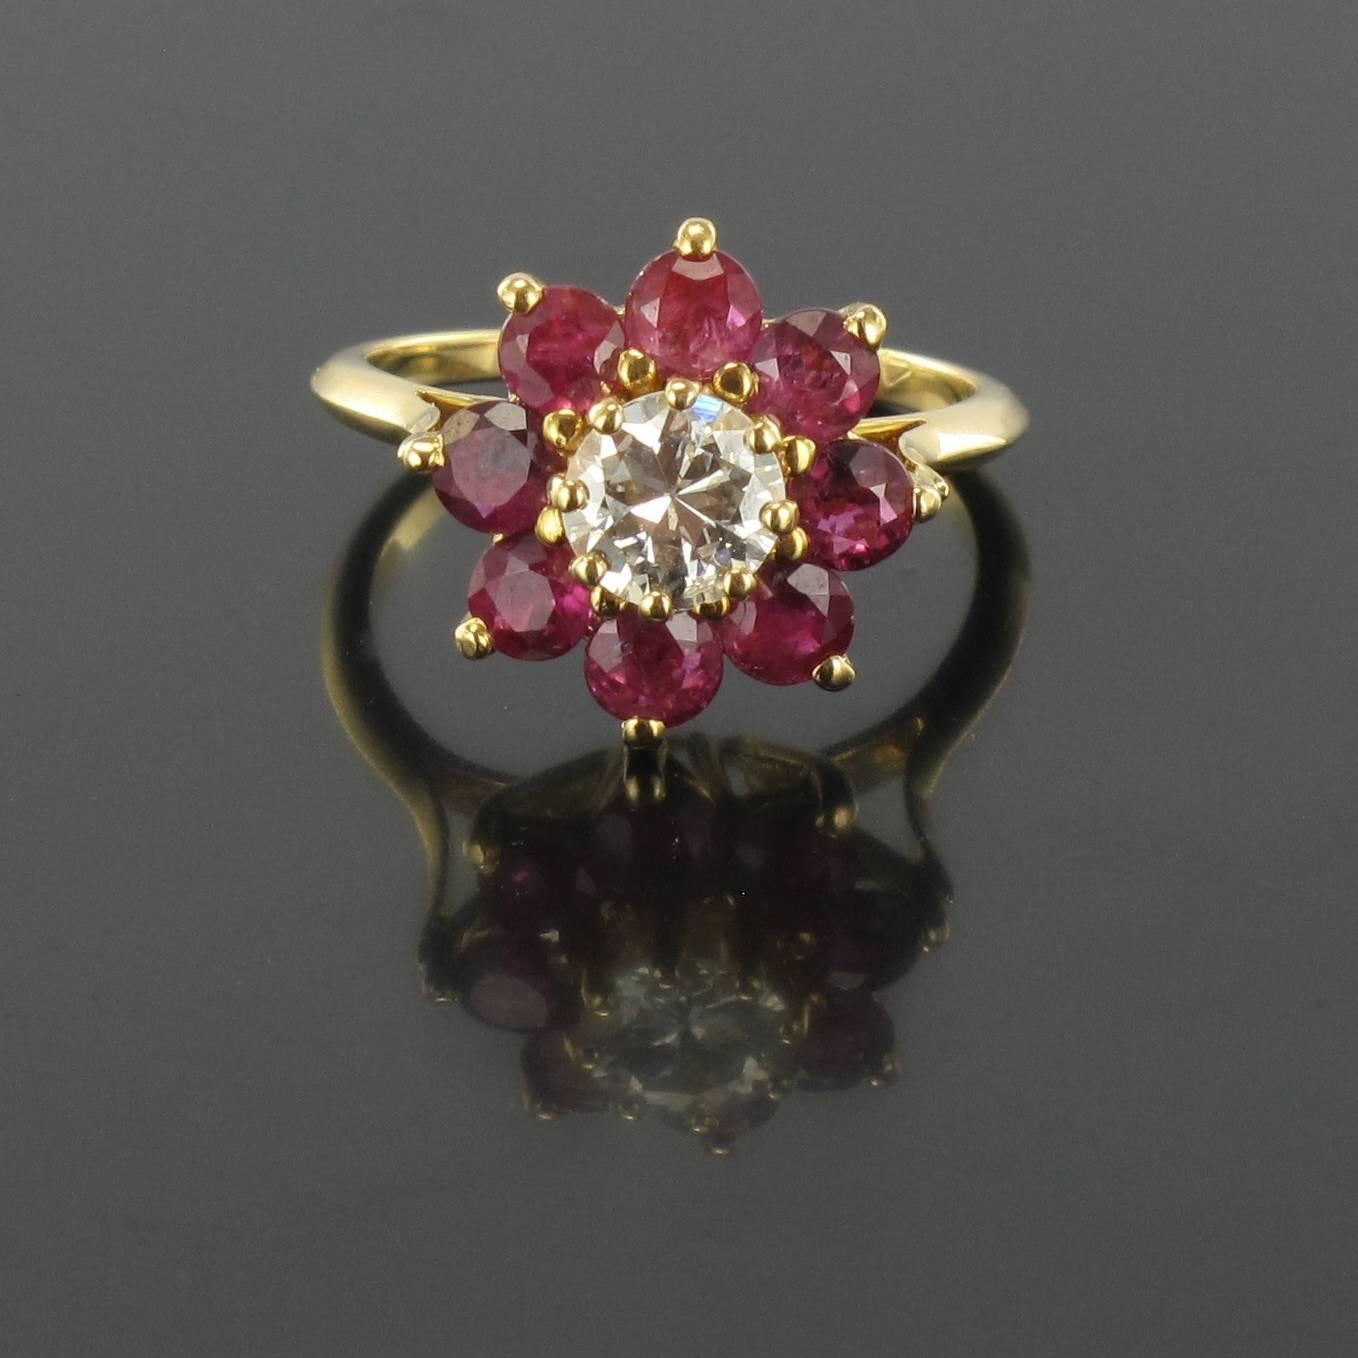 Ring in 18 carat yellow gold, eagle head hallmark. 
Claw set with a modern brillant cut diamond surrounded by 8 rond cut rubies
Diamond Weight: 0.45 carat about - Quality estimated diamond H / V
Rubies total weight : about 1.6 carat
Head diameter: